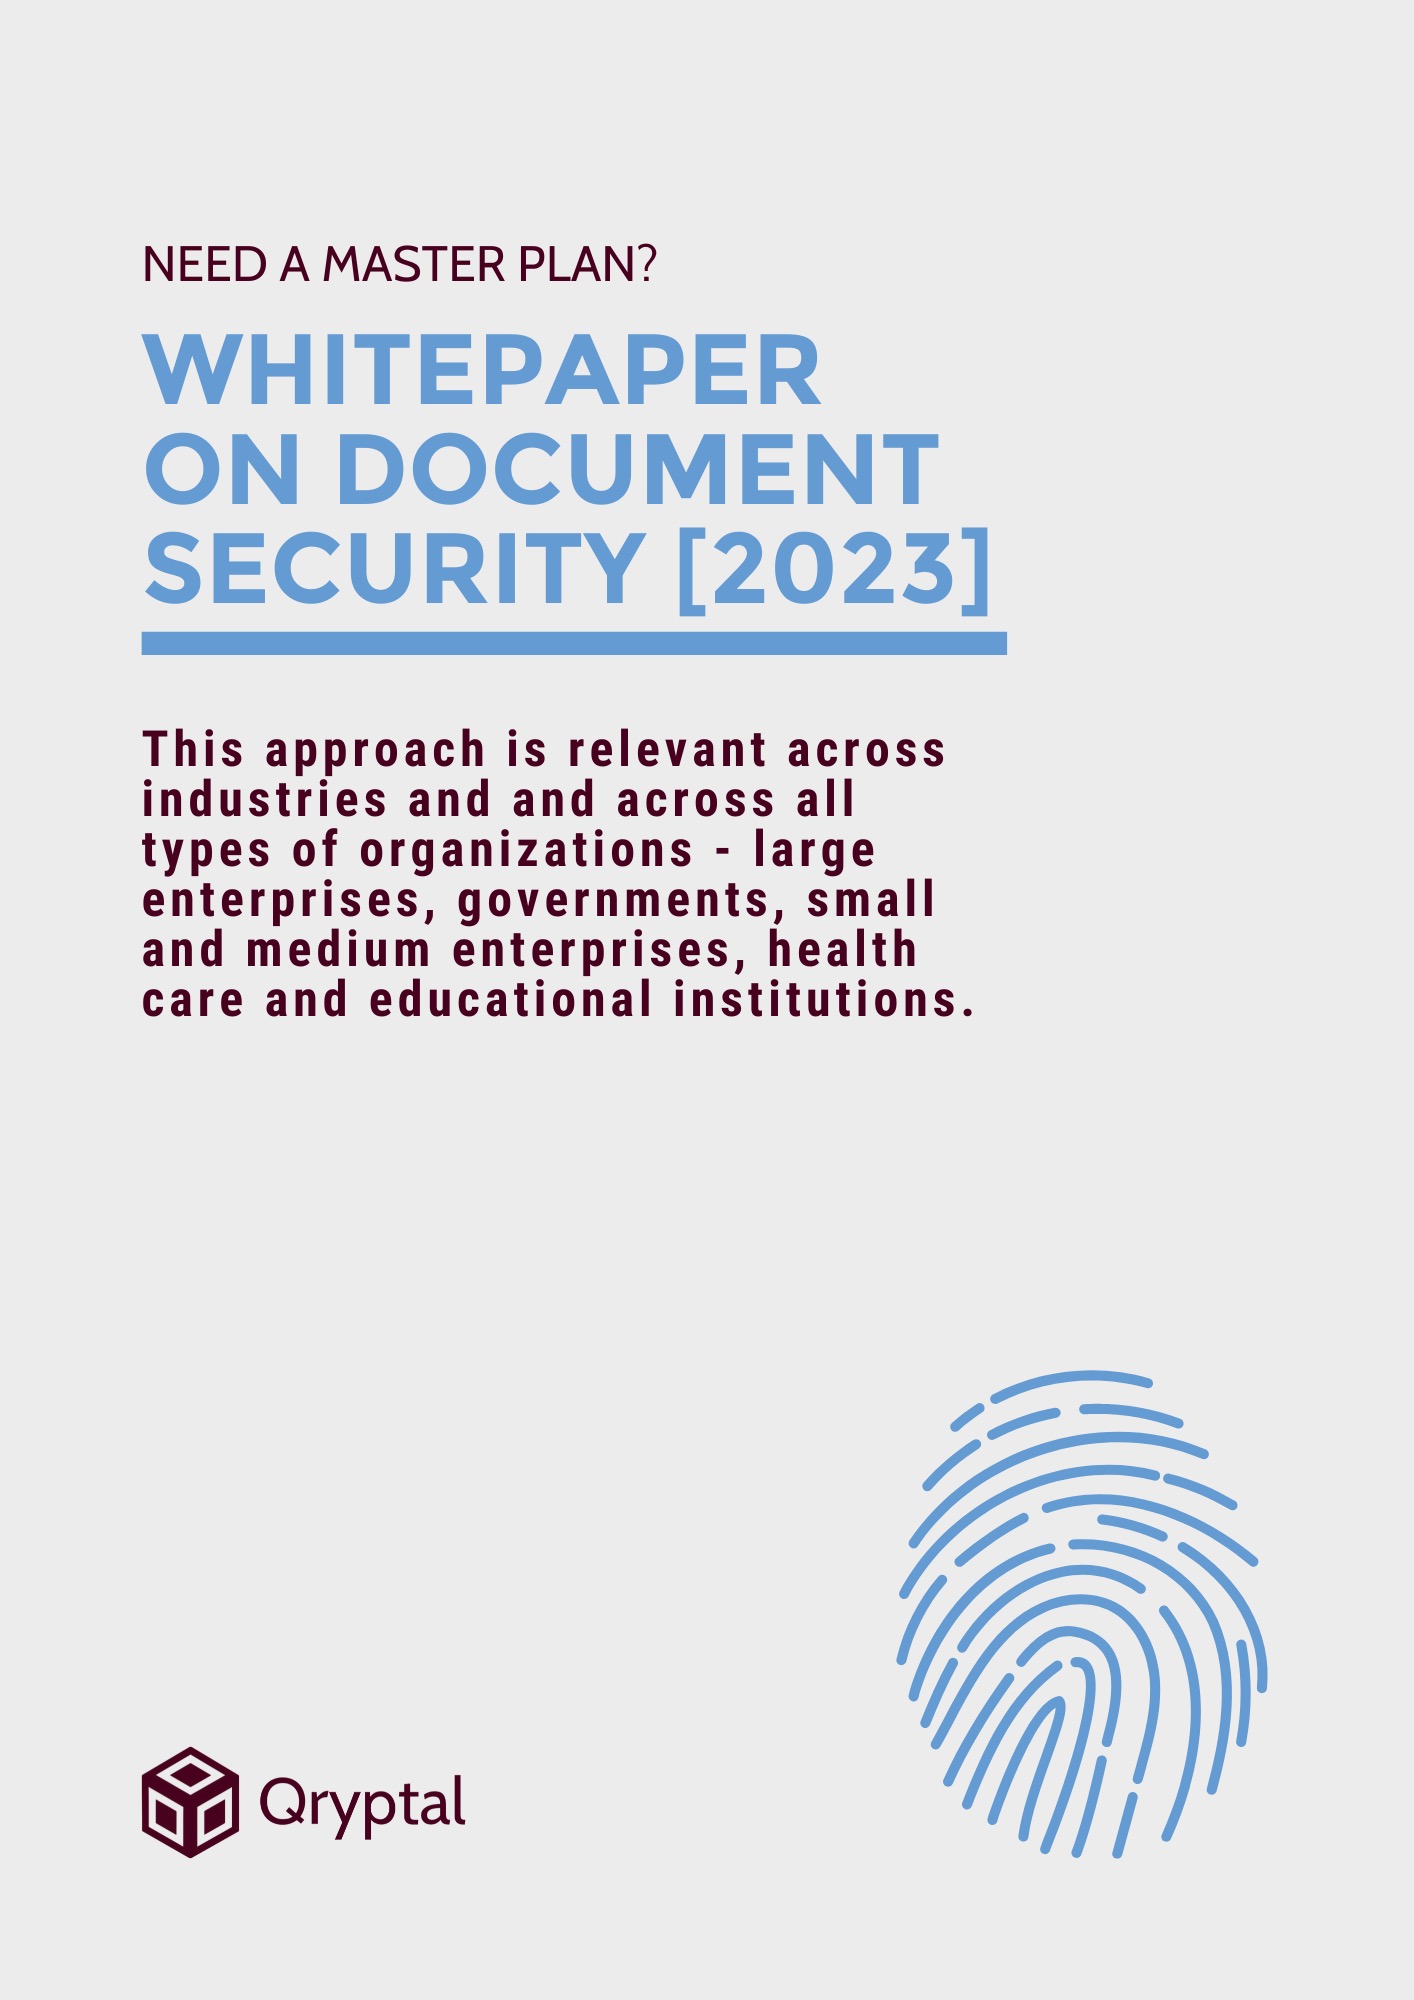 Whitepaper on Document Security